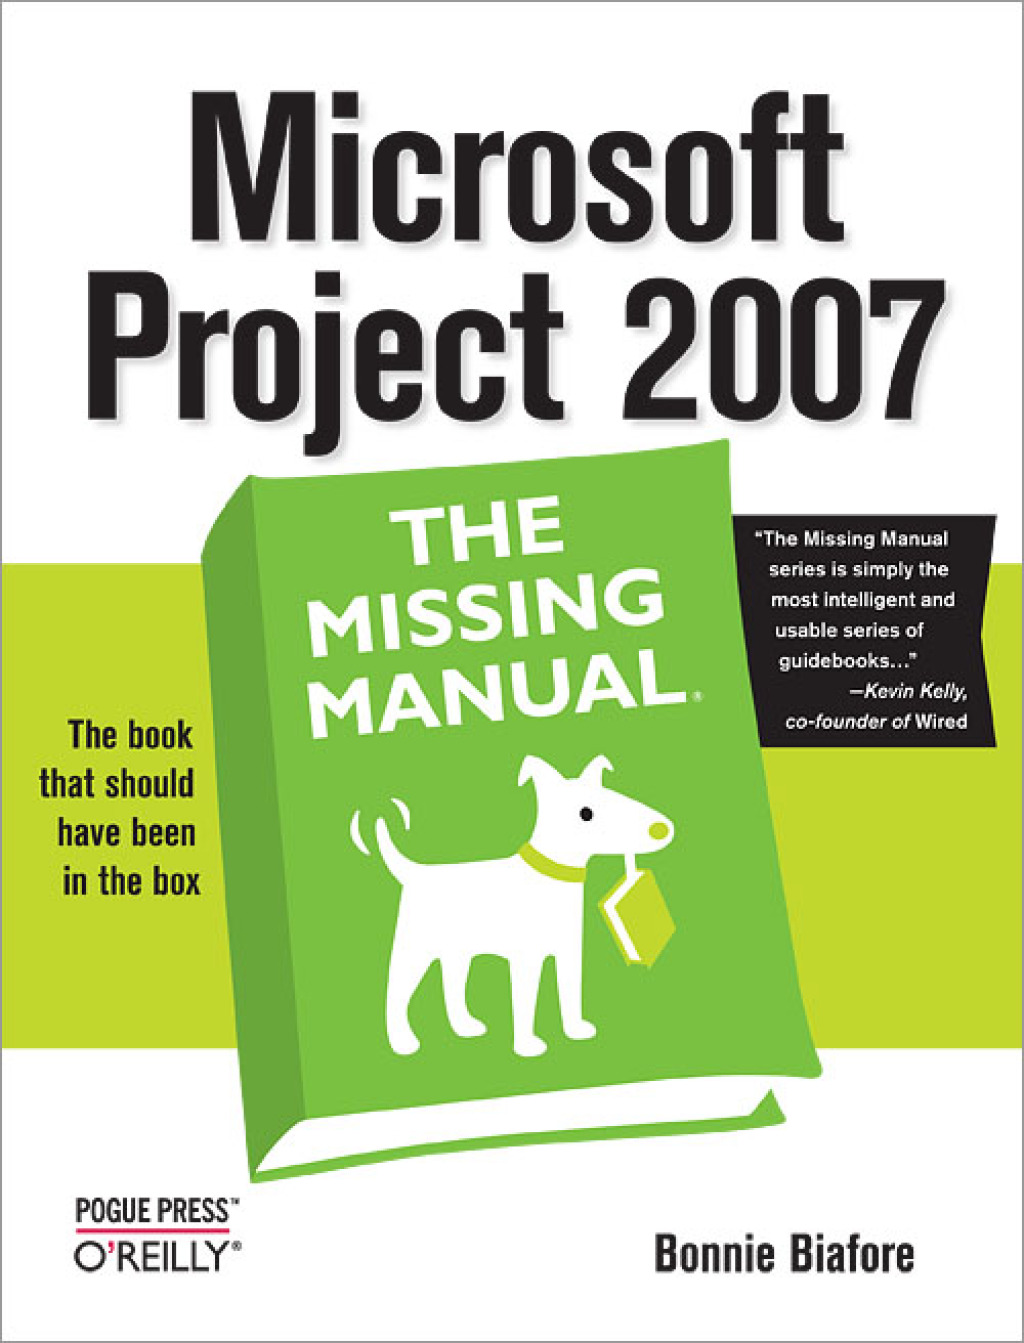 Microsoft Project 2007: The Missing Manual (eBook) - Bonnie Biafore